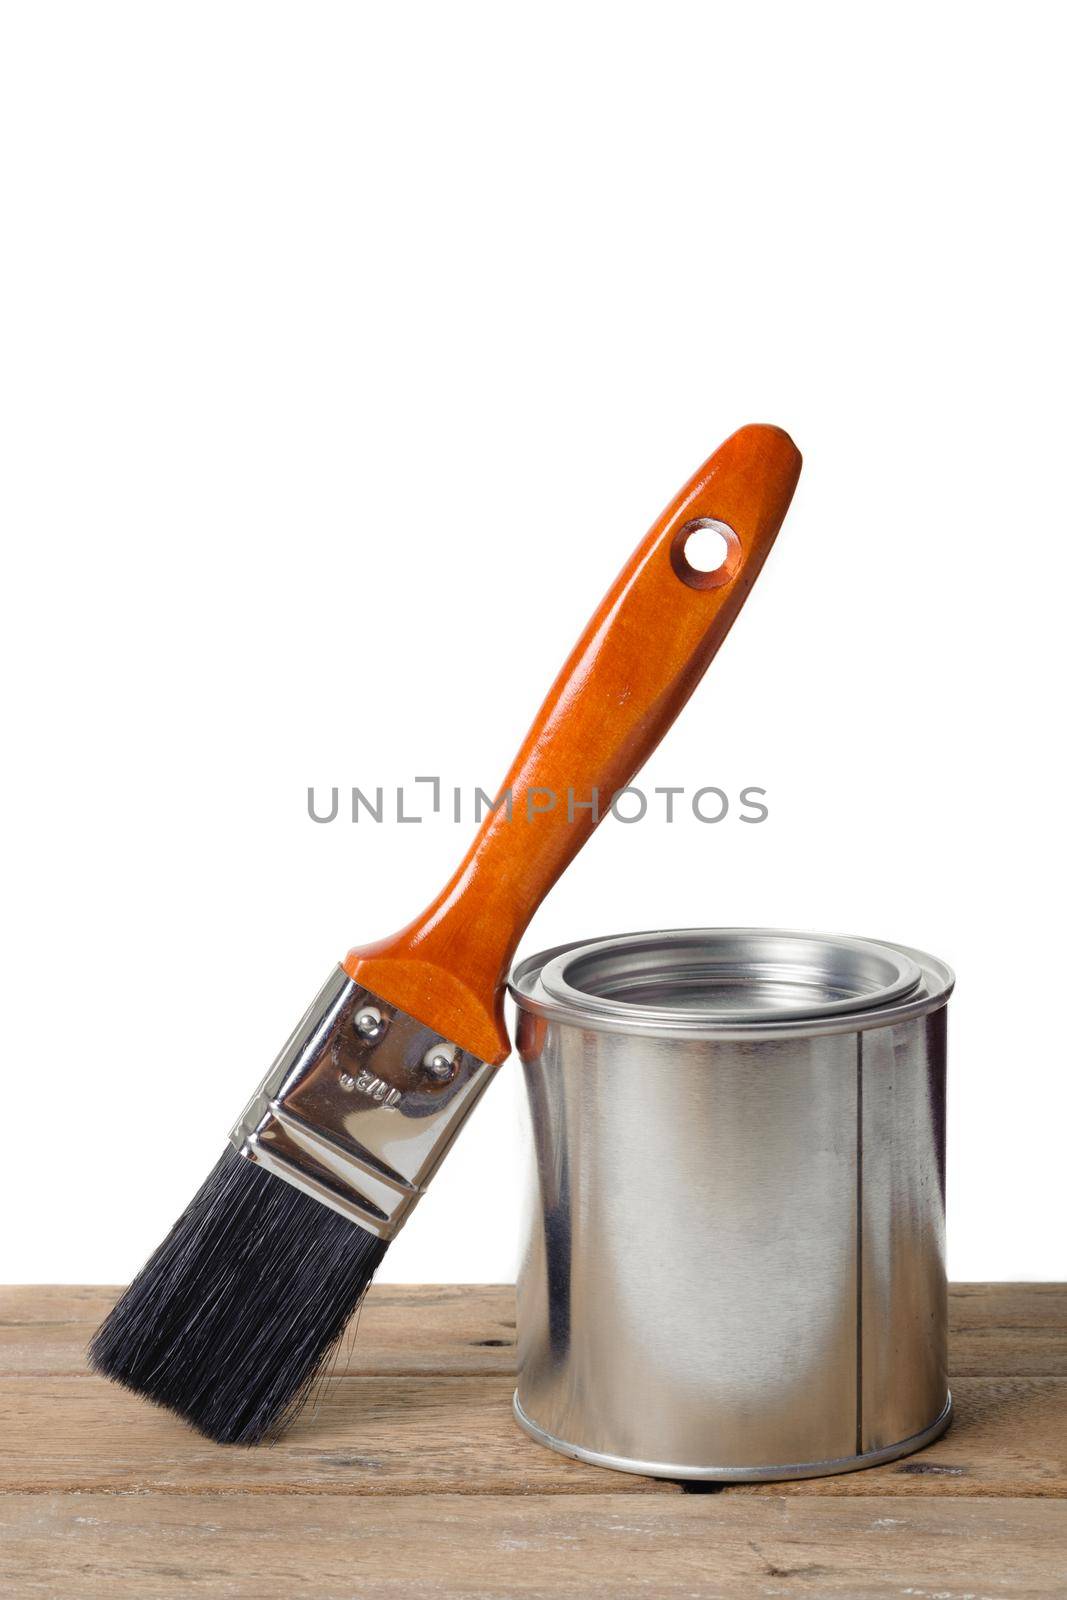 closeup new paintbrush with wooden handle over white background